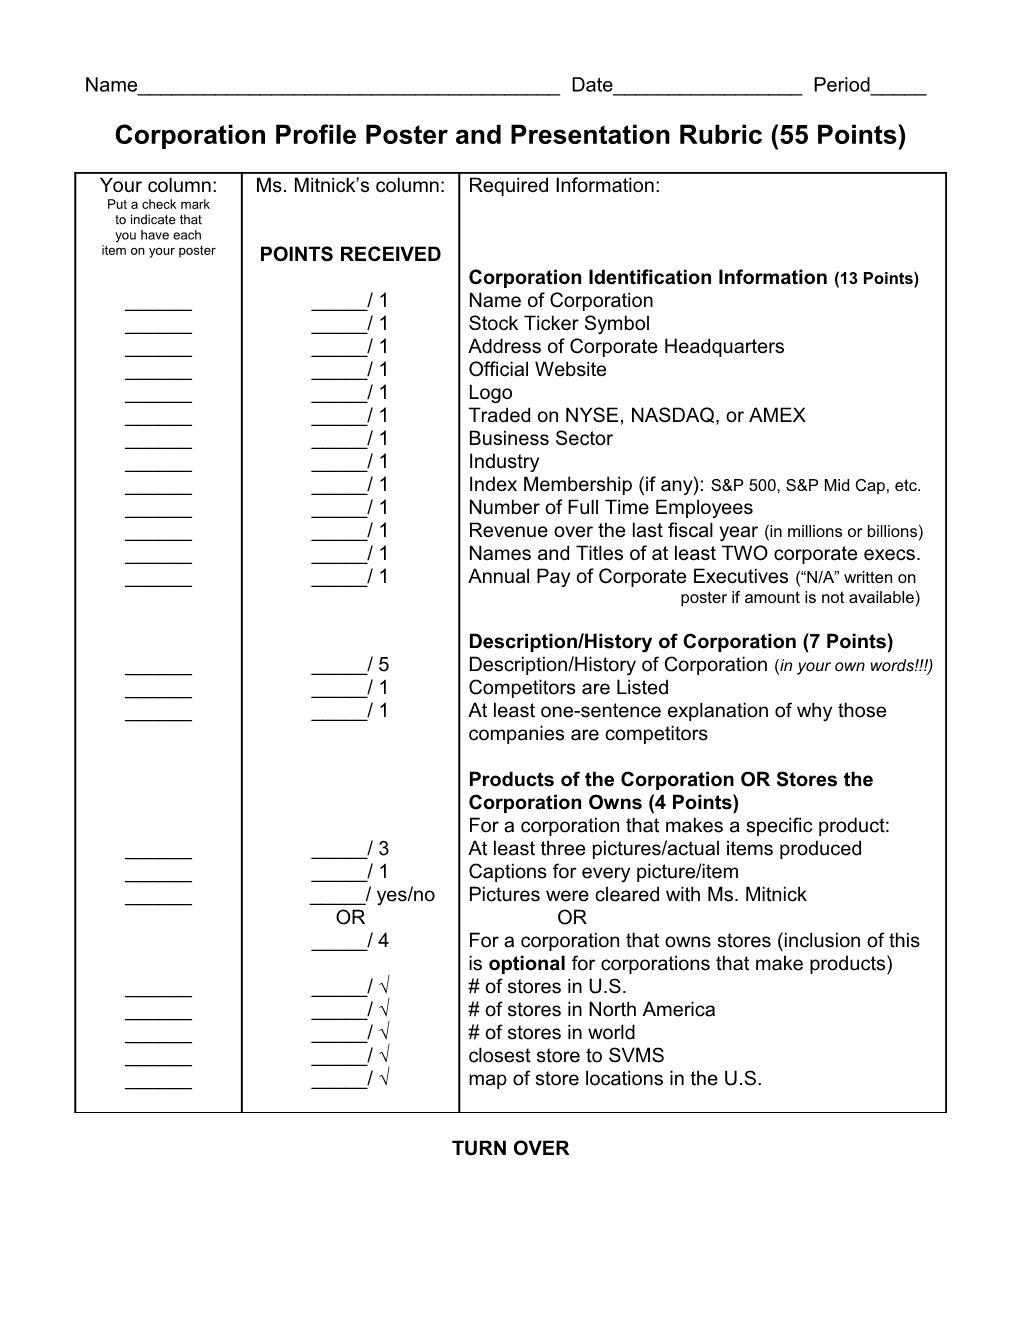 Corporation Profile Poster and Presentation Rubric (55 Points)